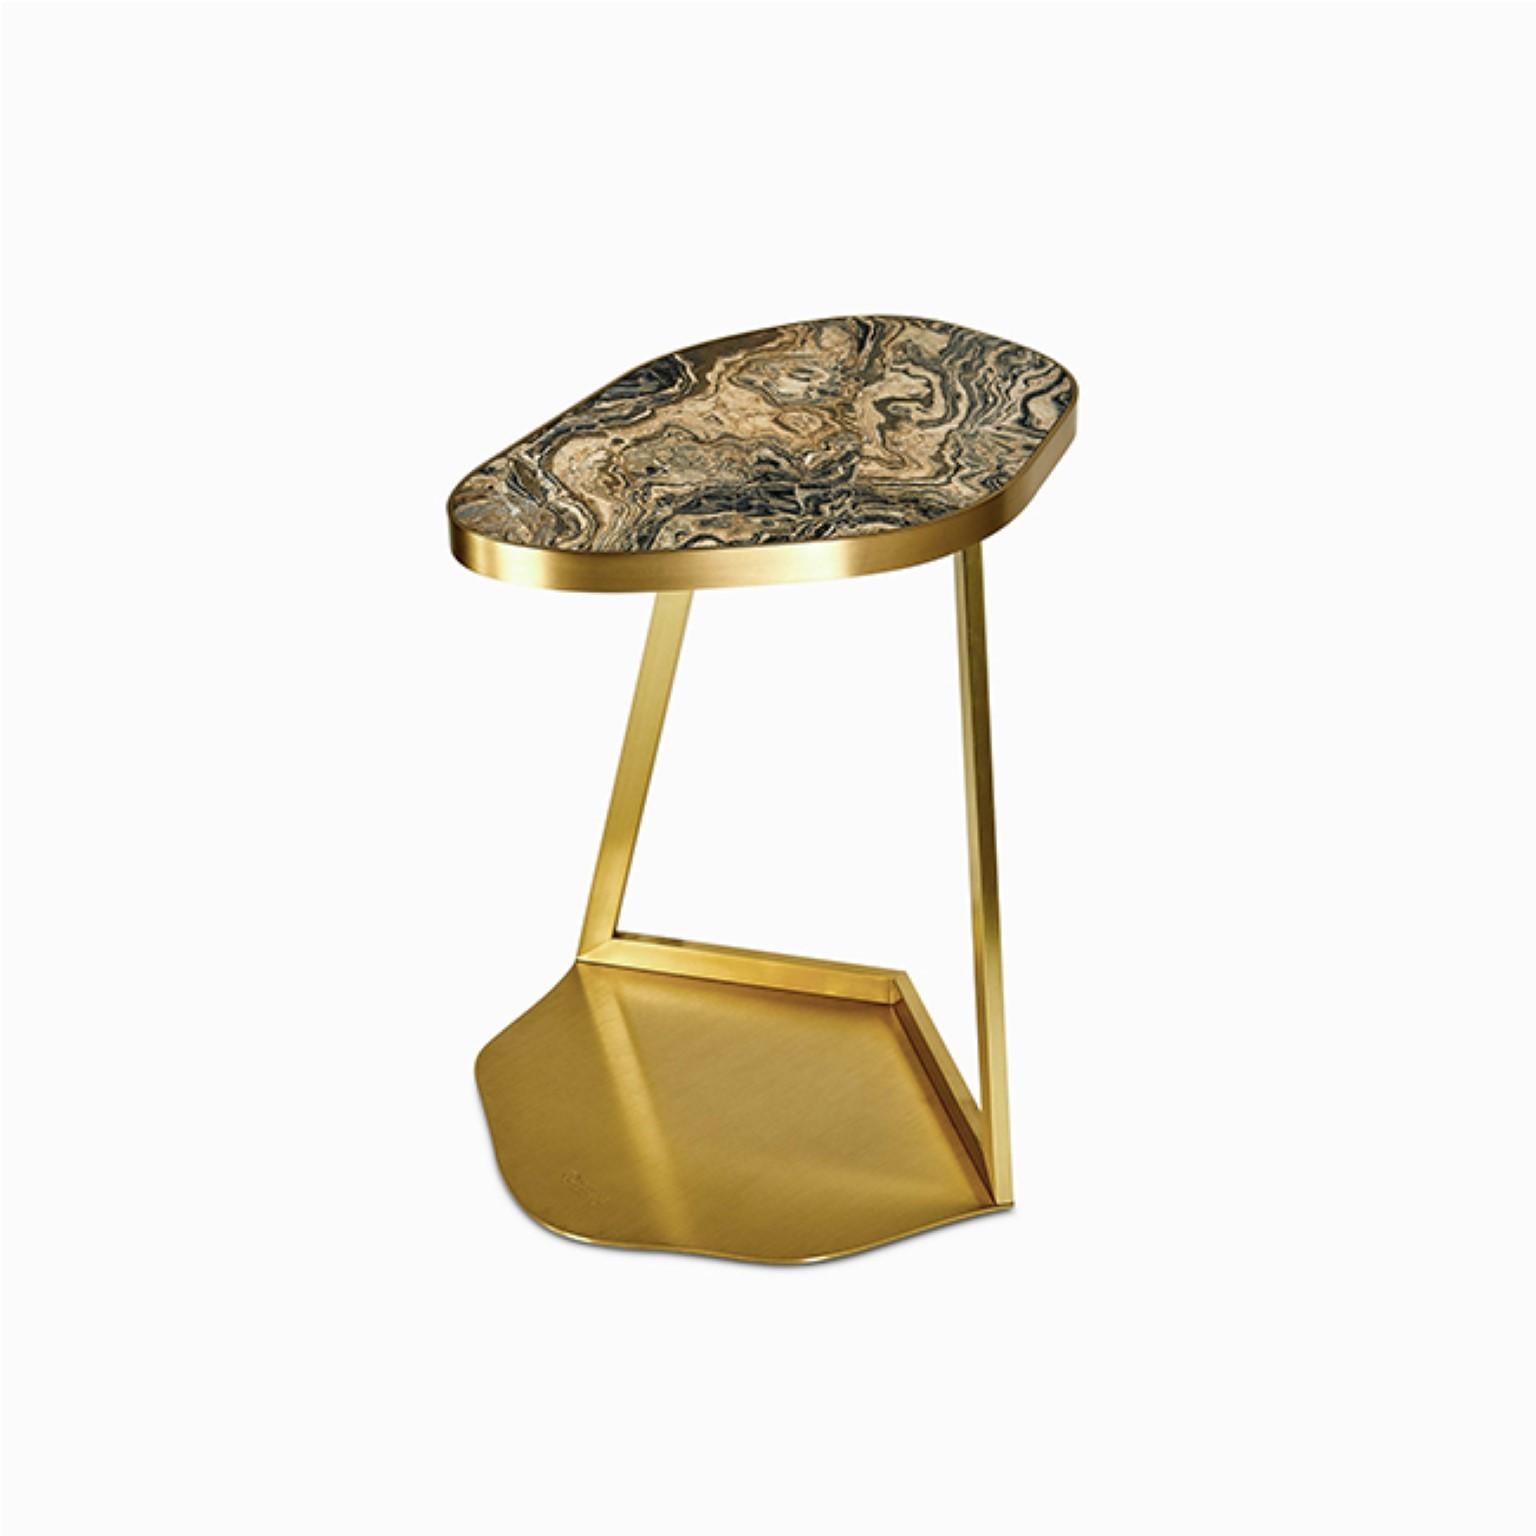 Gediz Side & C table by Marble Balloon
Dimensions: W 58.5 x D 37 x H 55 cm
Materials: Satin Brass & Marble

Taking its name from the famous Gediz River, it consists of a carrier base made of 100% brass and a marble top.

Marble balloon is an